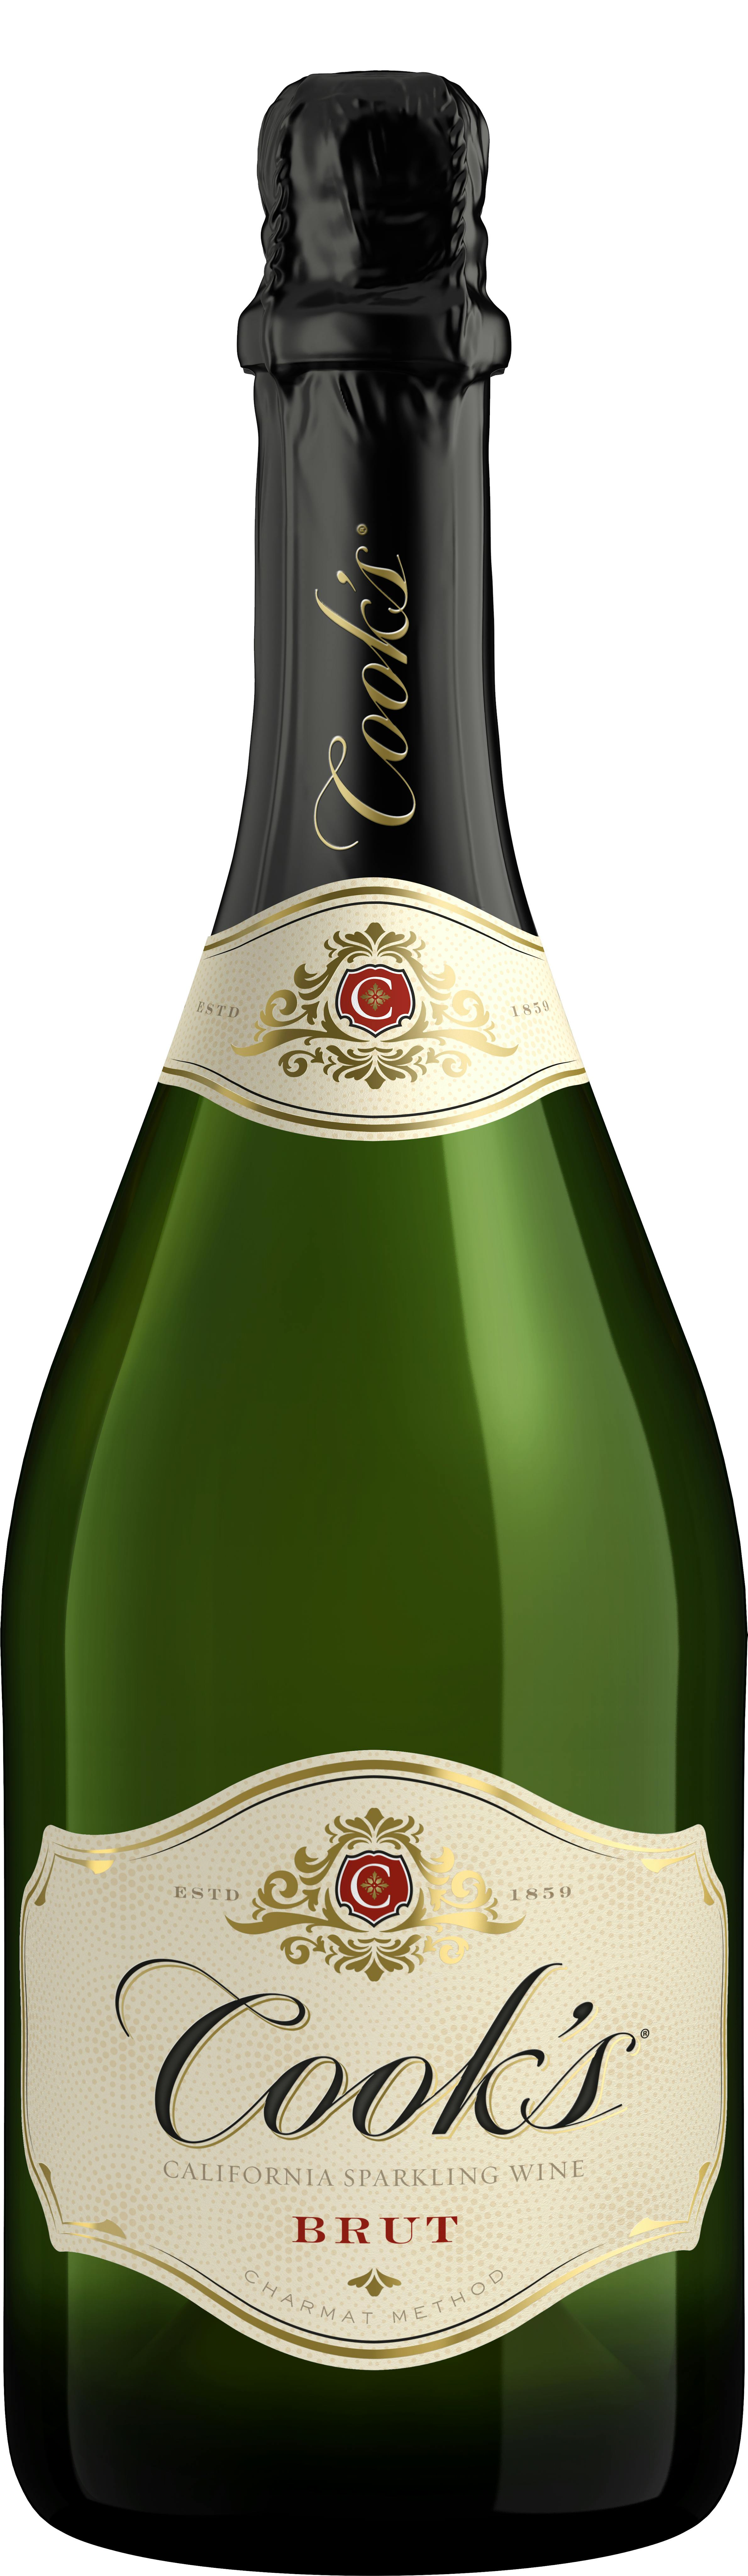 Cook's Brut 750ml - Buster's Liquors & Wines